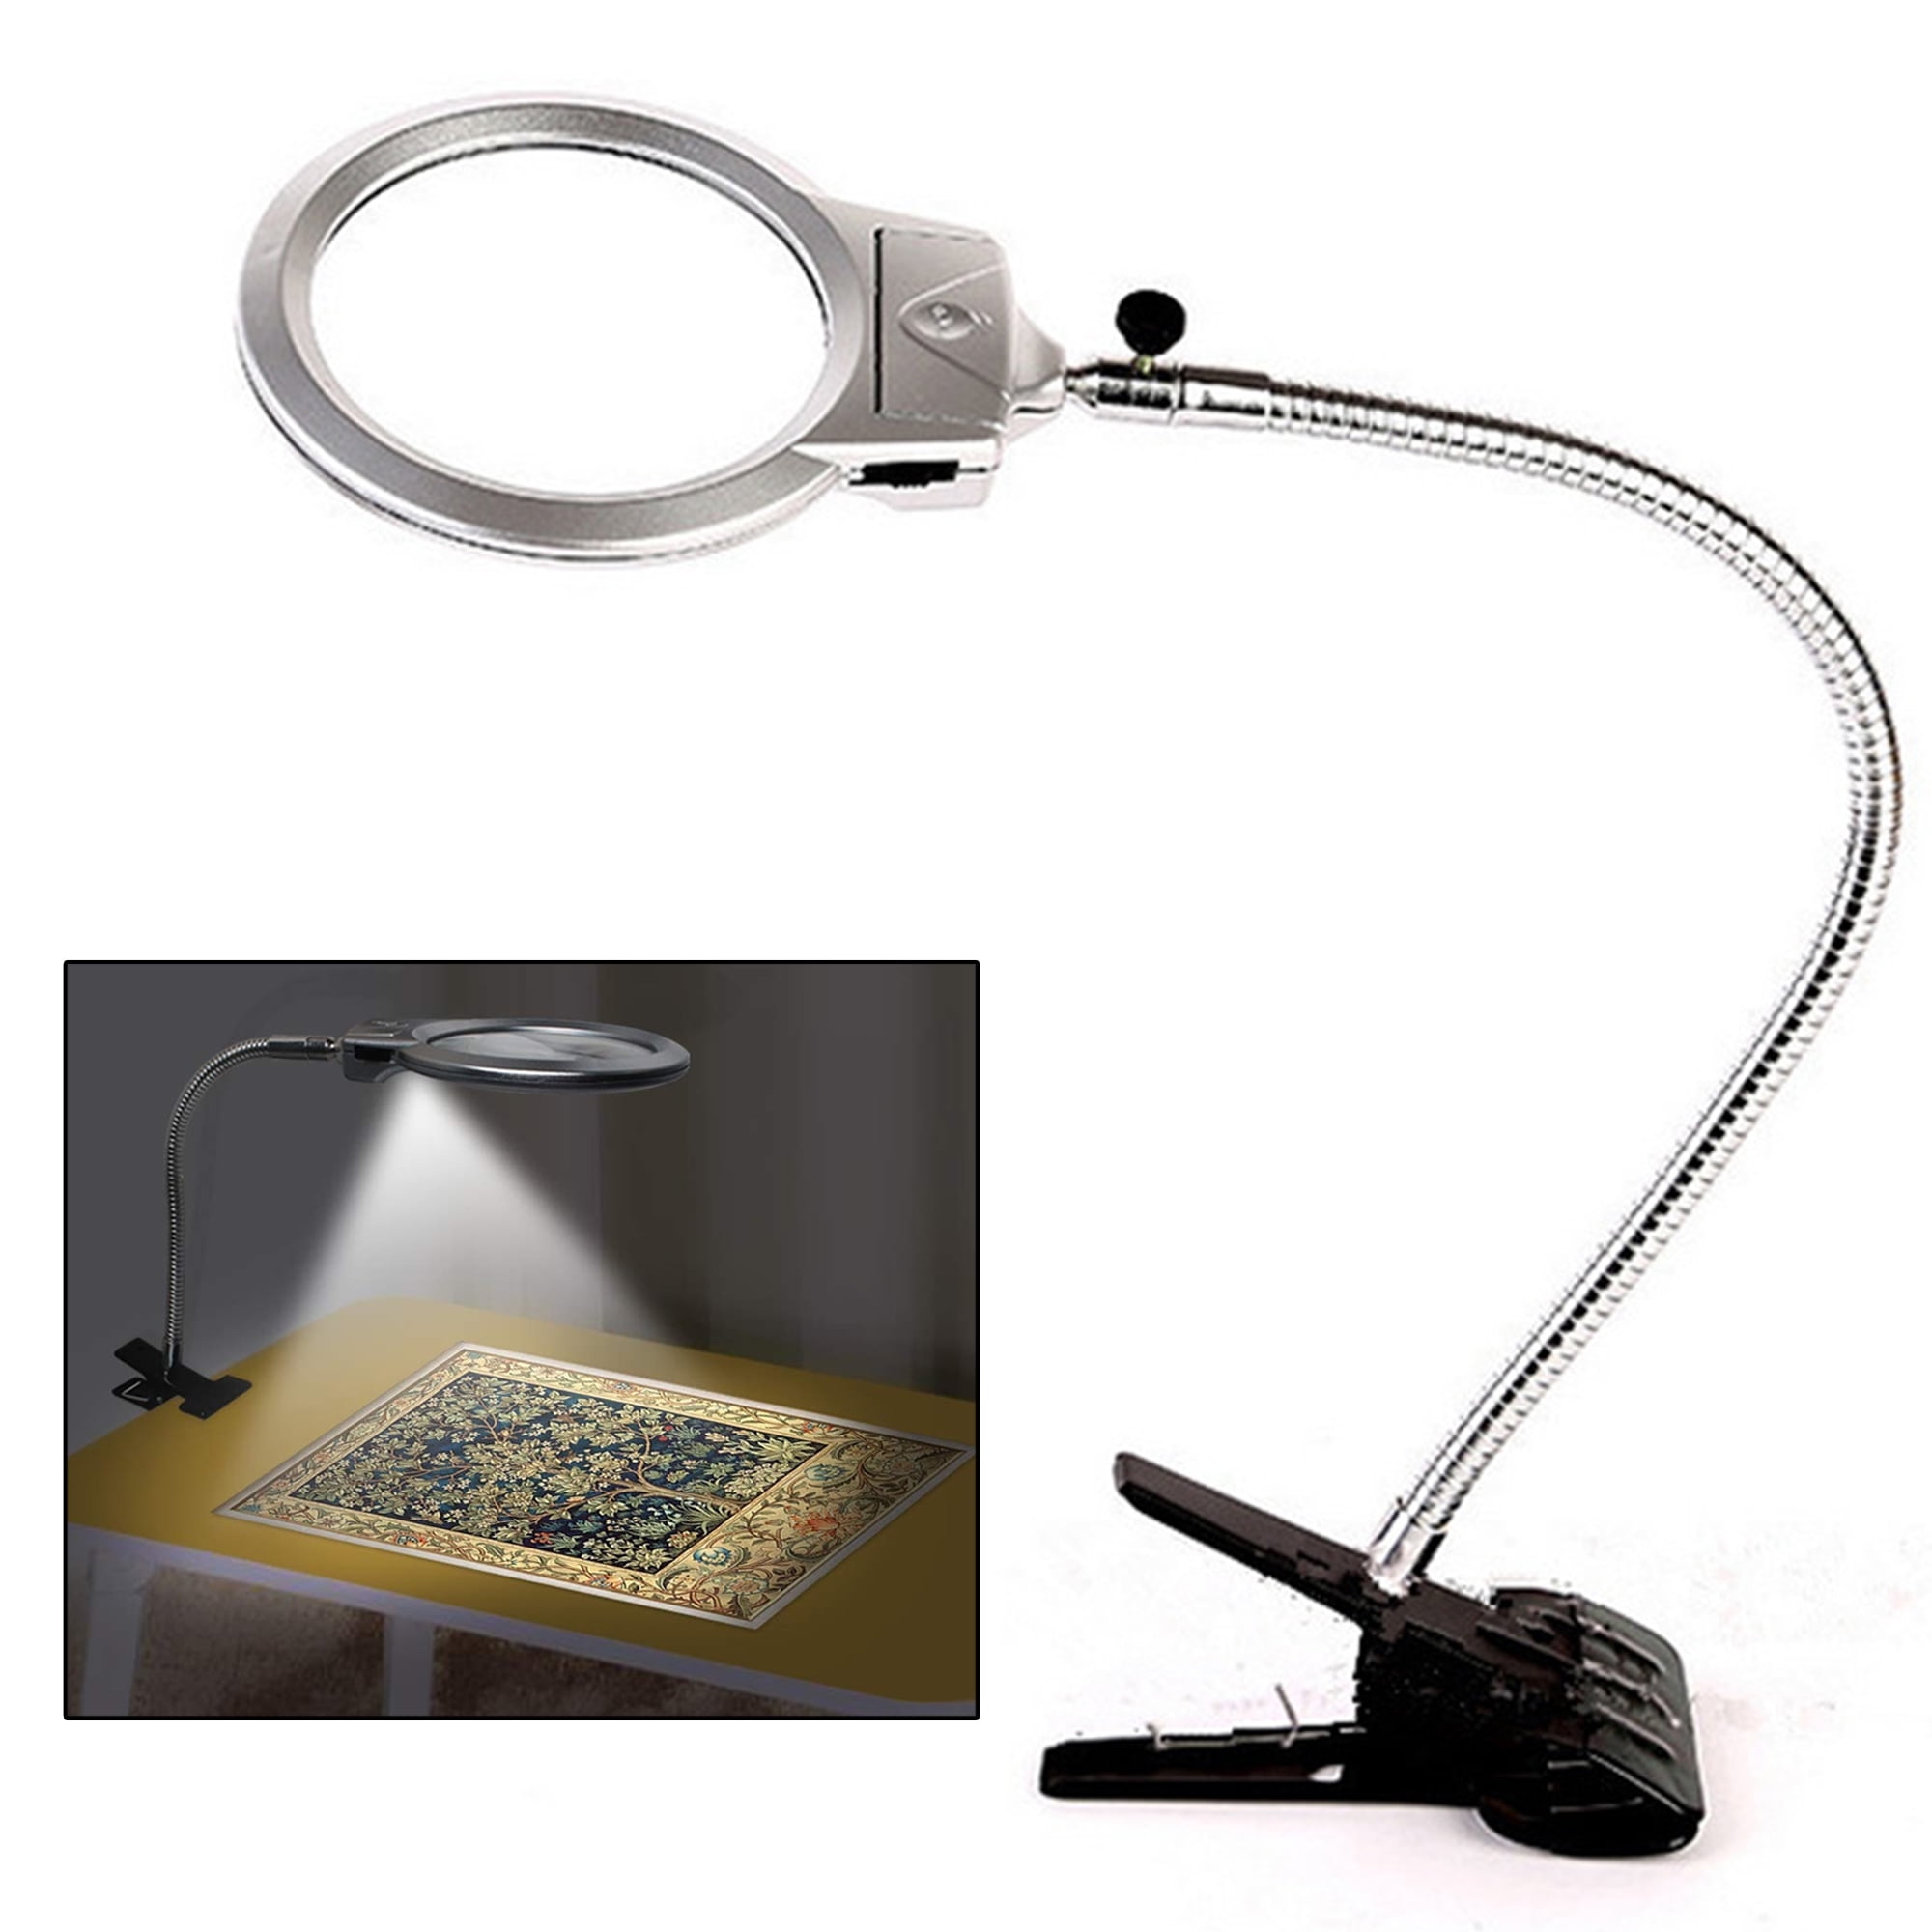 Justech LED Illuminated Magnifier with Stand 2X 6X Magnification Hands Free for Reading Crafts Inspection Needlework Hobbies